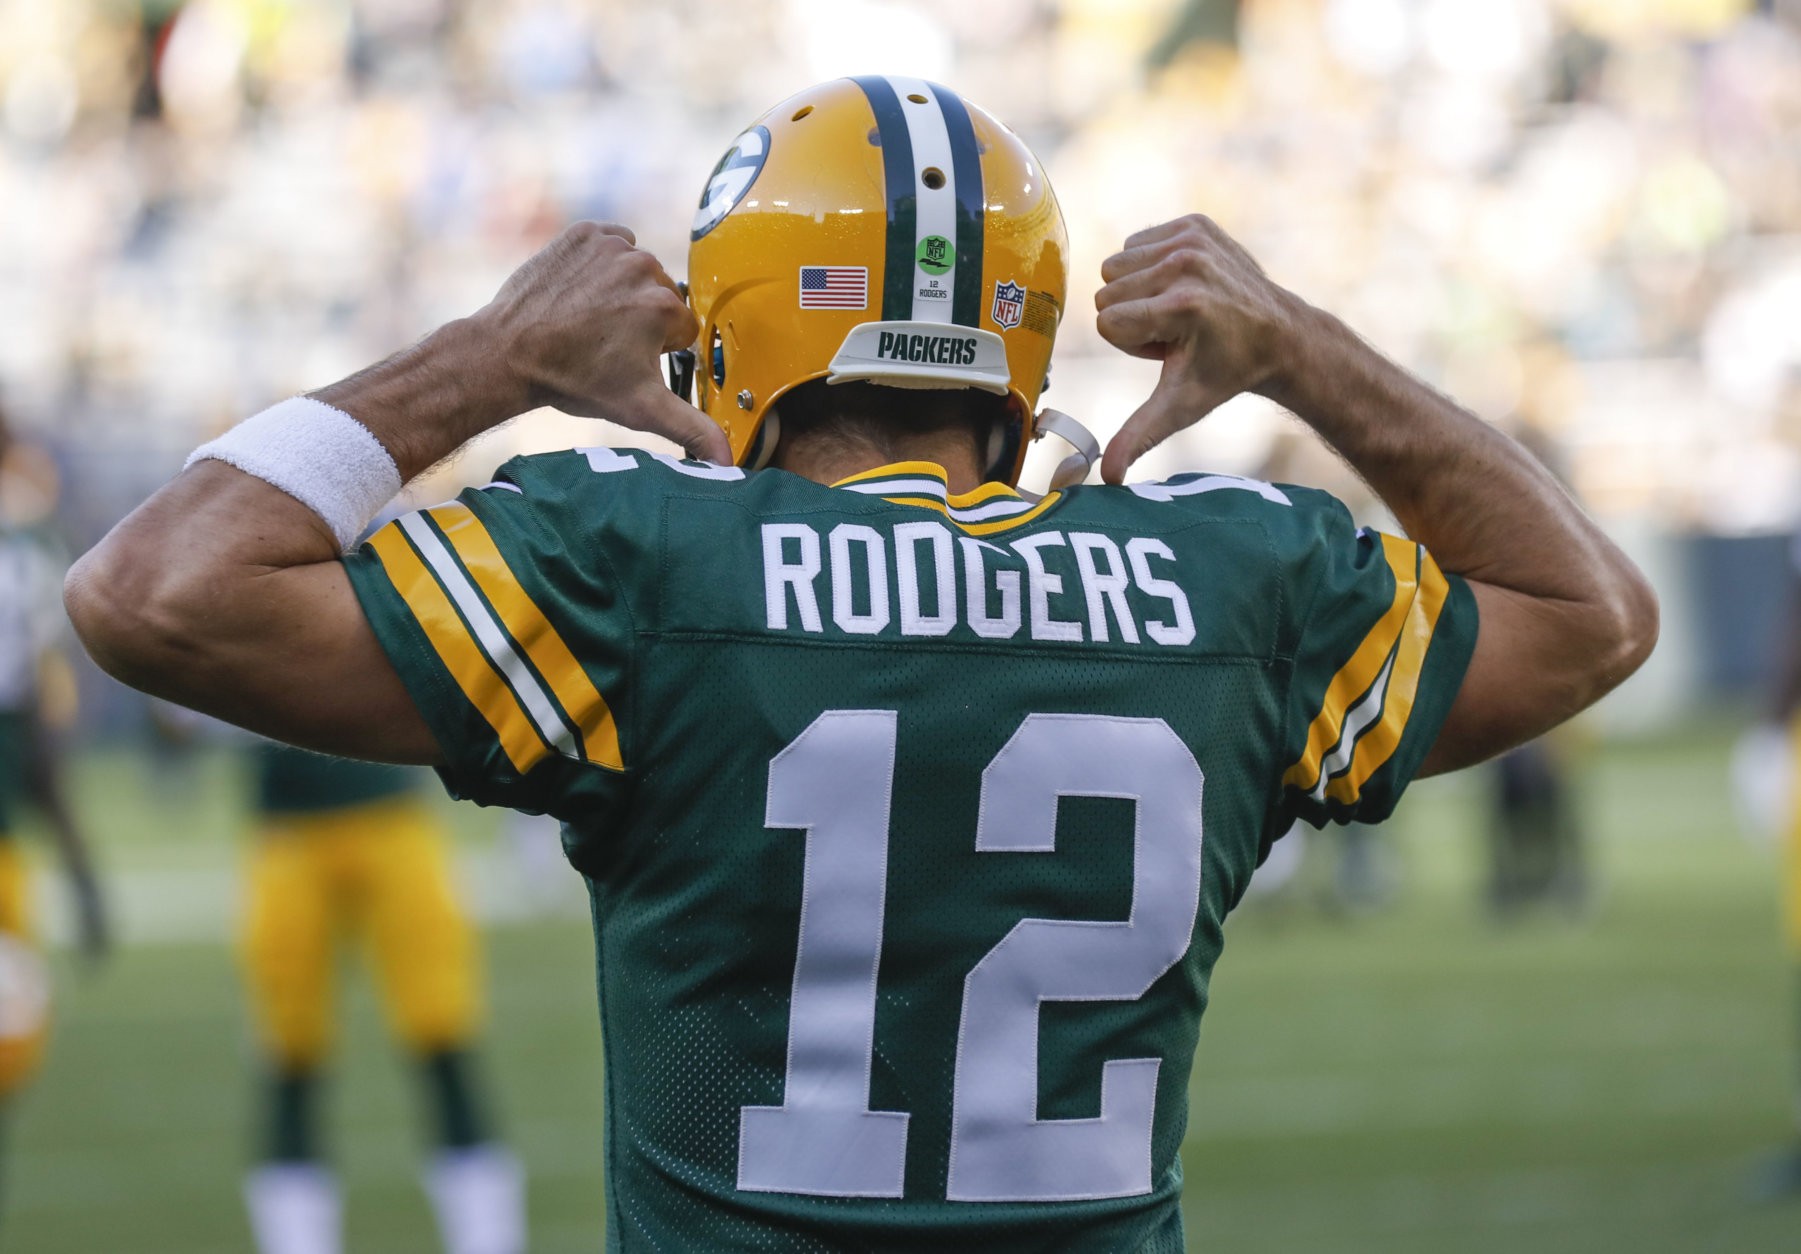 Green Bay Packers' Aaron Rodgers points to his back before a preseason NFL football game against the Los Angeles Rams Thursday, Aug. 31, 2017, in Green Bay, Wis. (AP Photo/Jeffrey Phelps)